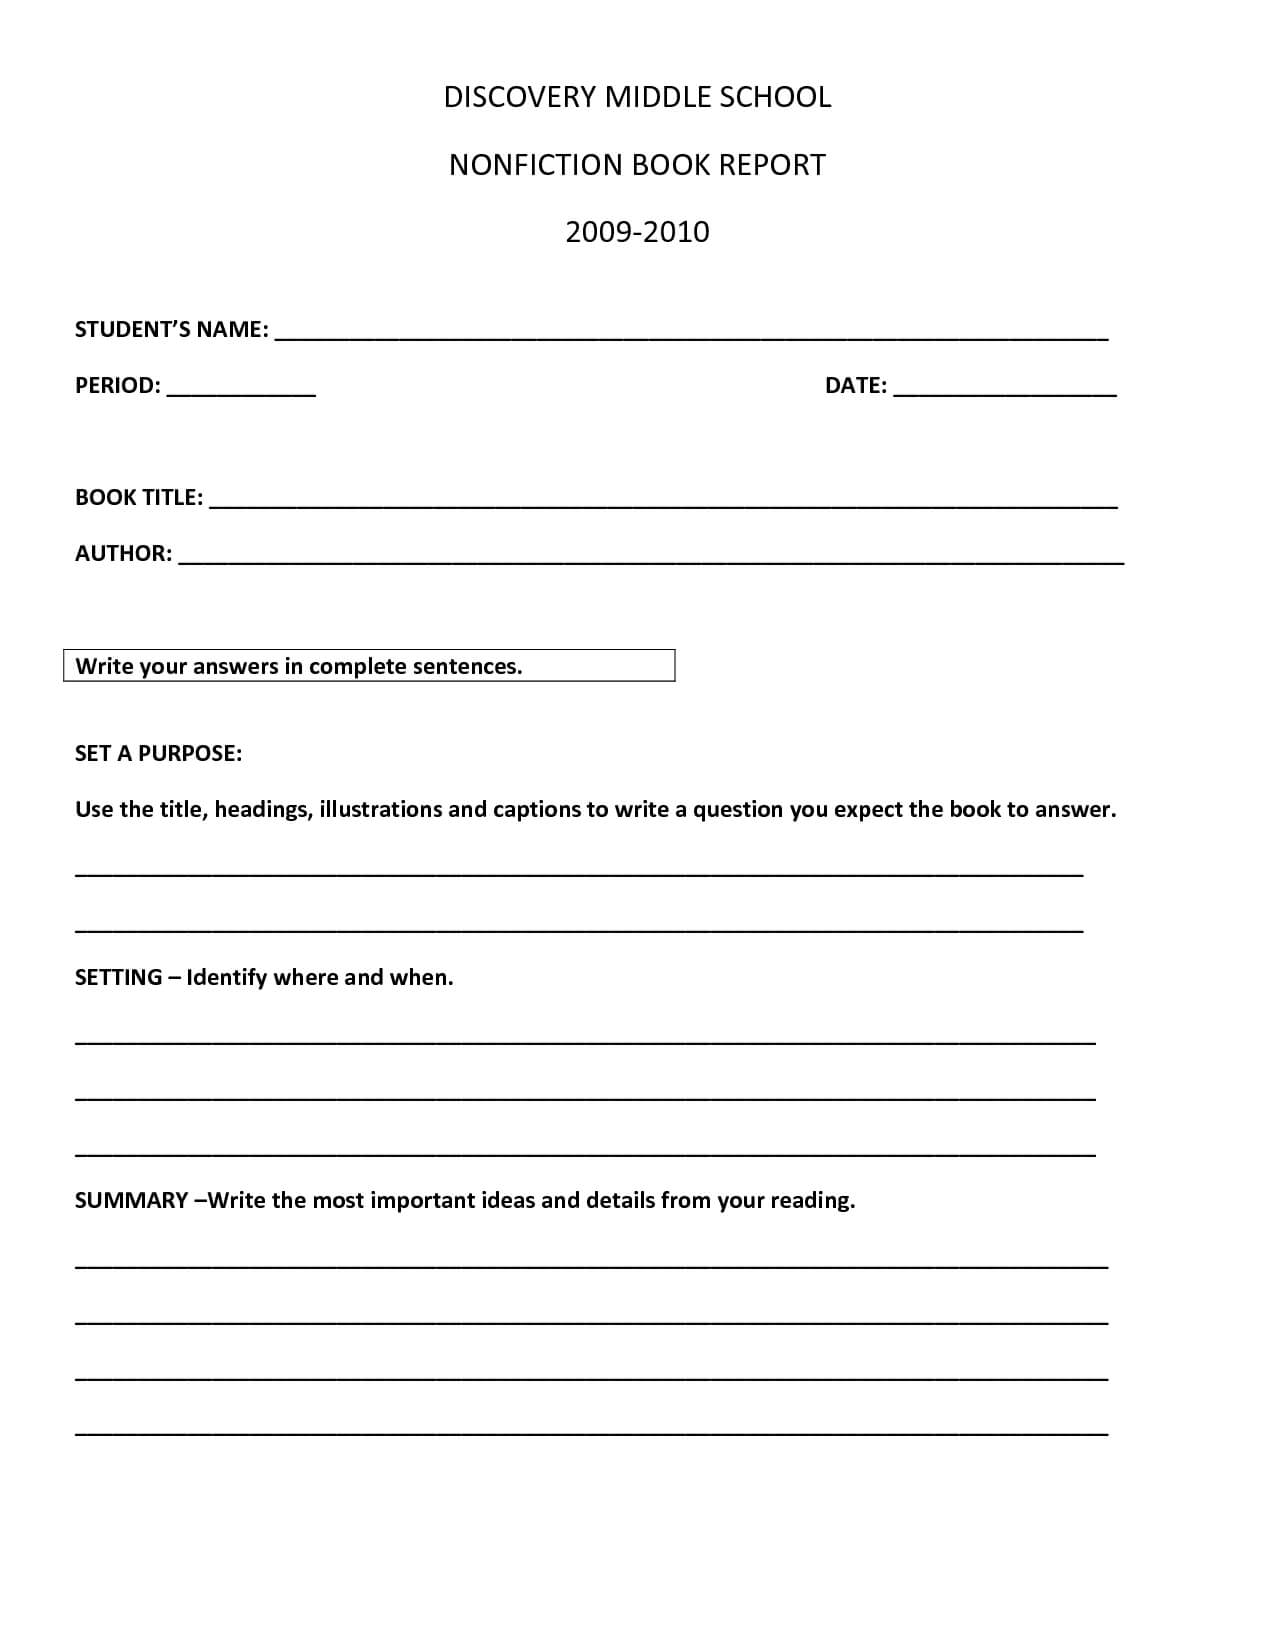 Book Report Template | Discovery Middle School Nonfiction For High School Book Report Template